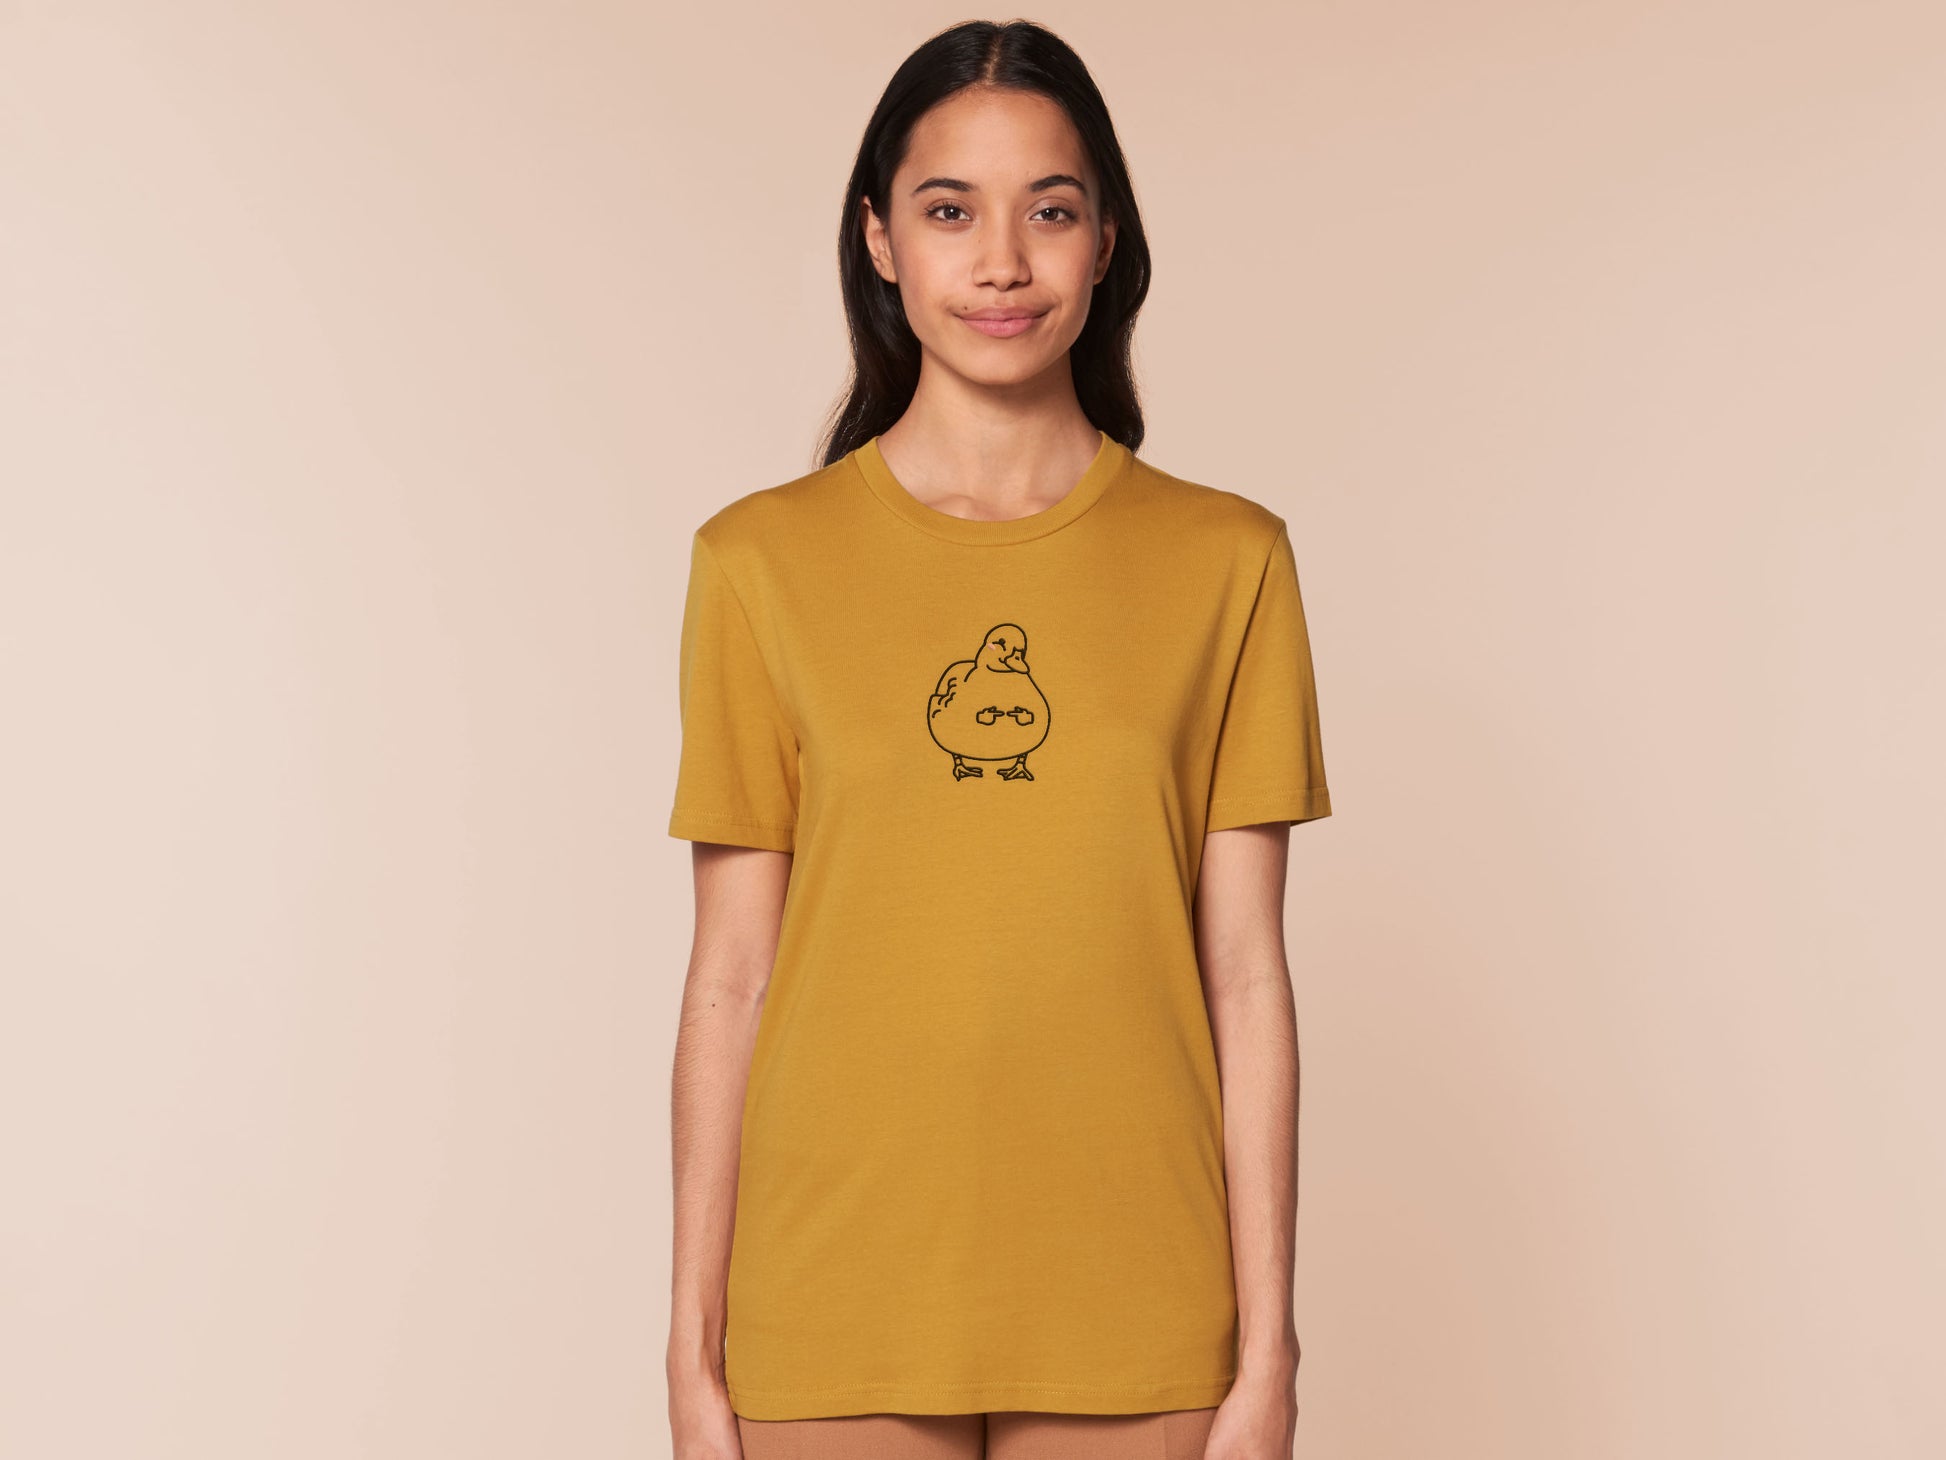 A woman wearing a yellow crew neck short sleeve t-shirt, with an embroidered black thread design of cute blushing duck with the for me finger hand emoji symbols